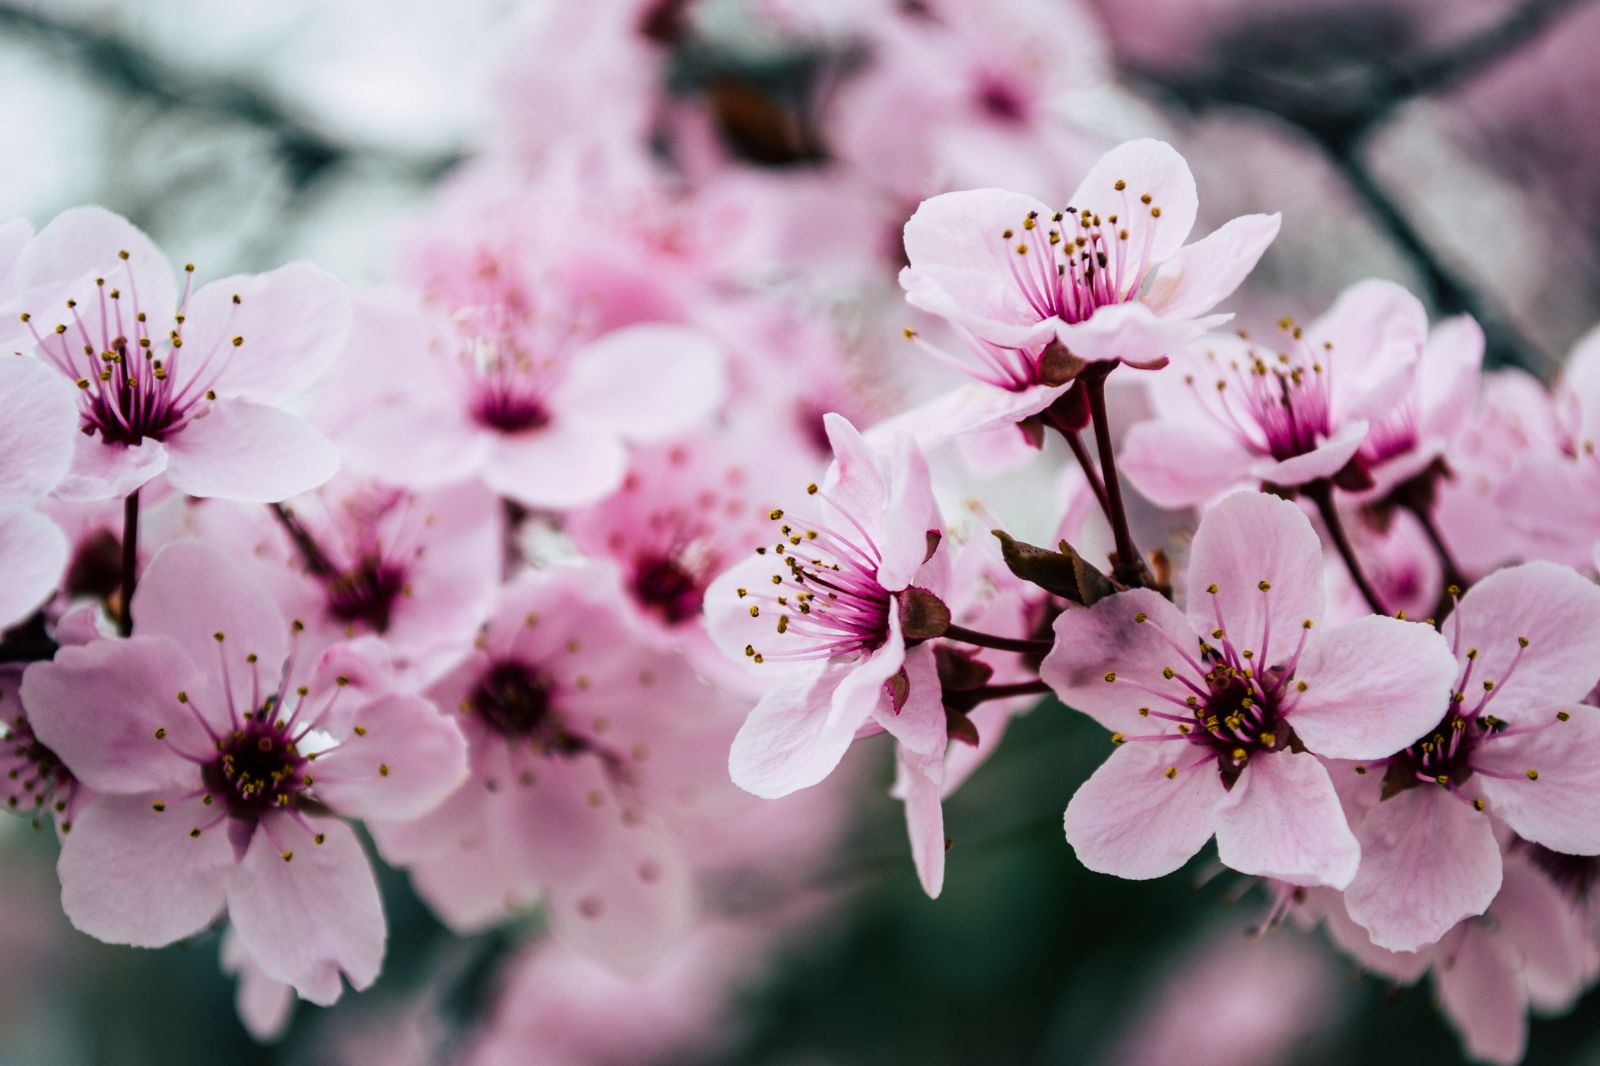 Close up image of a cherry blossom in Japan